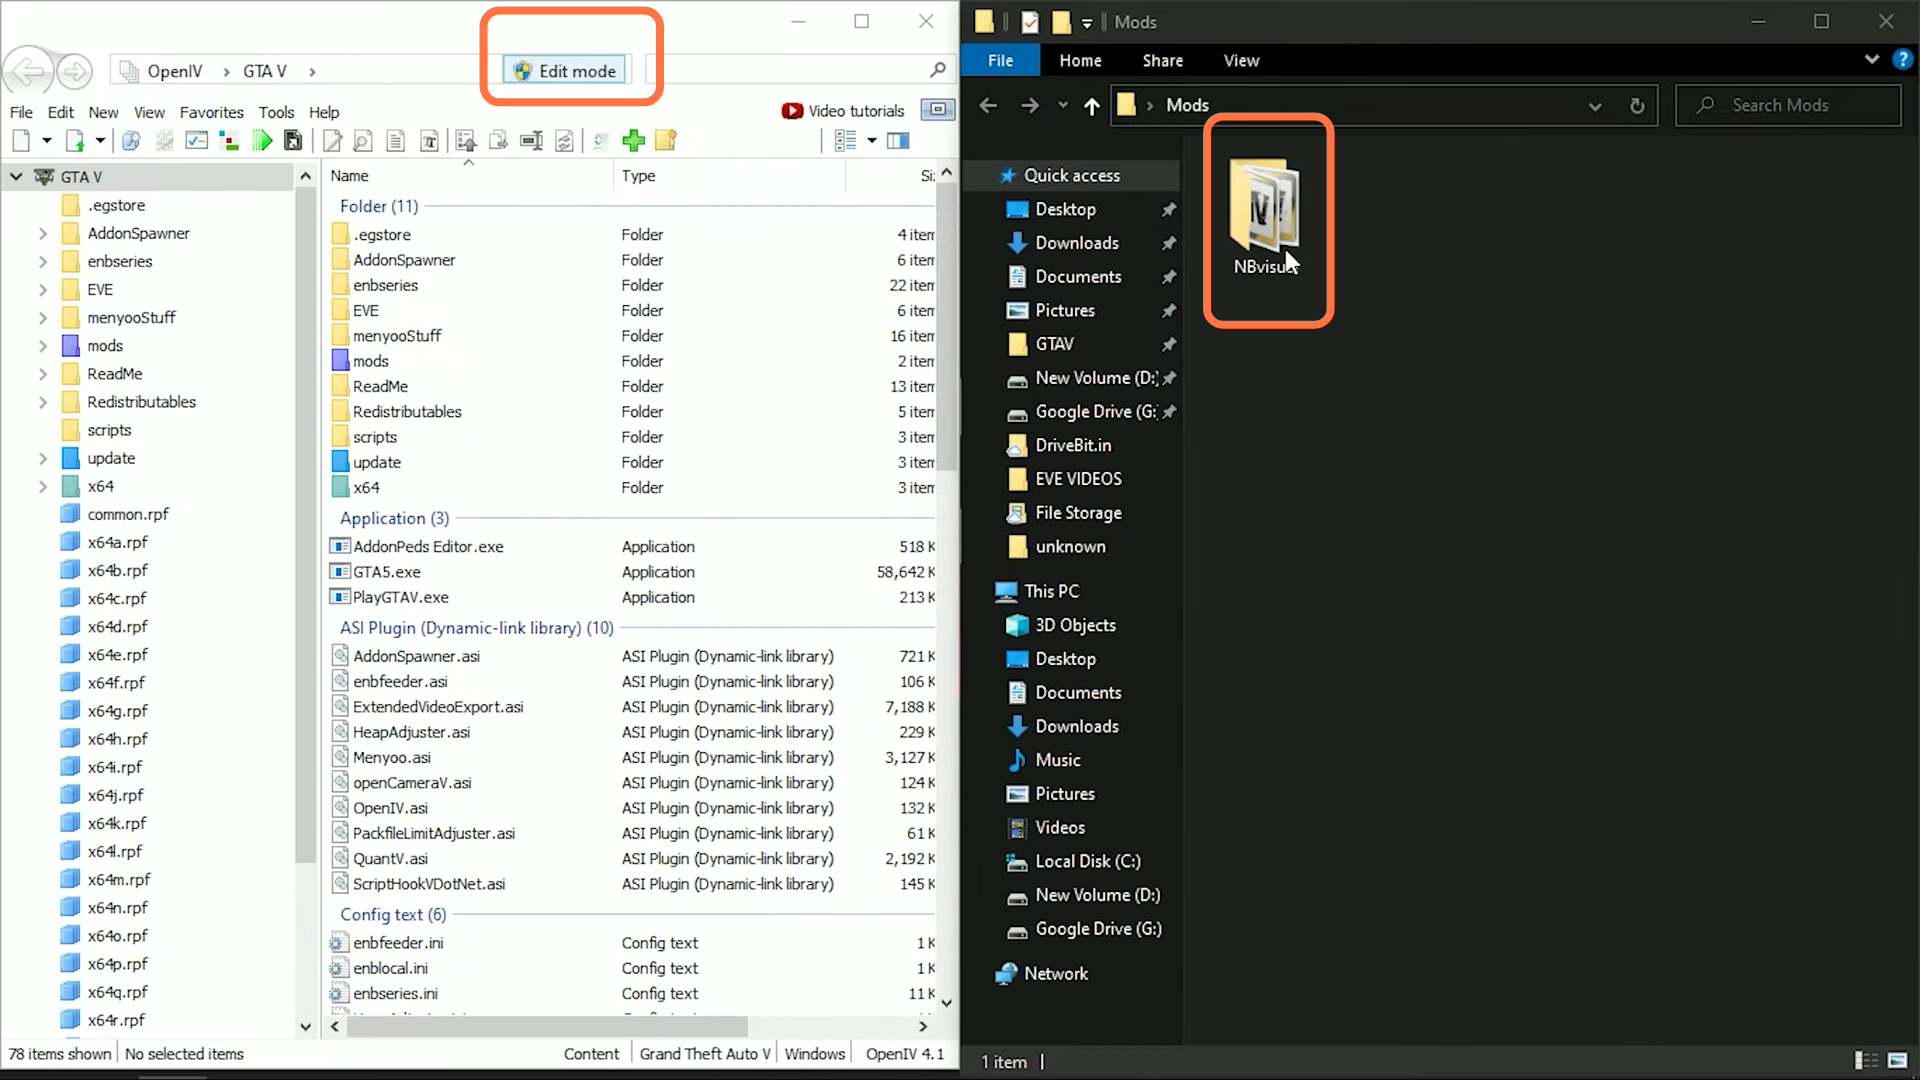 Then open the "Open IV" application, press "Edit Mode" and also open the Downloaded Mod folder adjacent to Open IV.